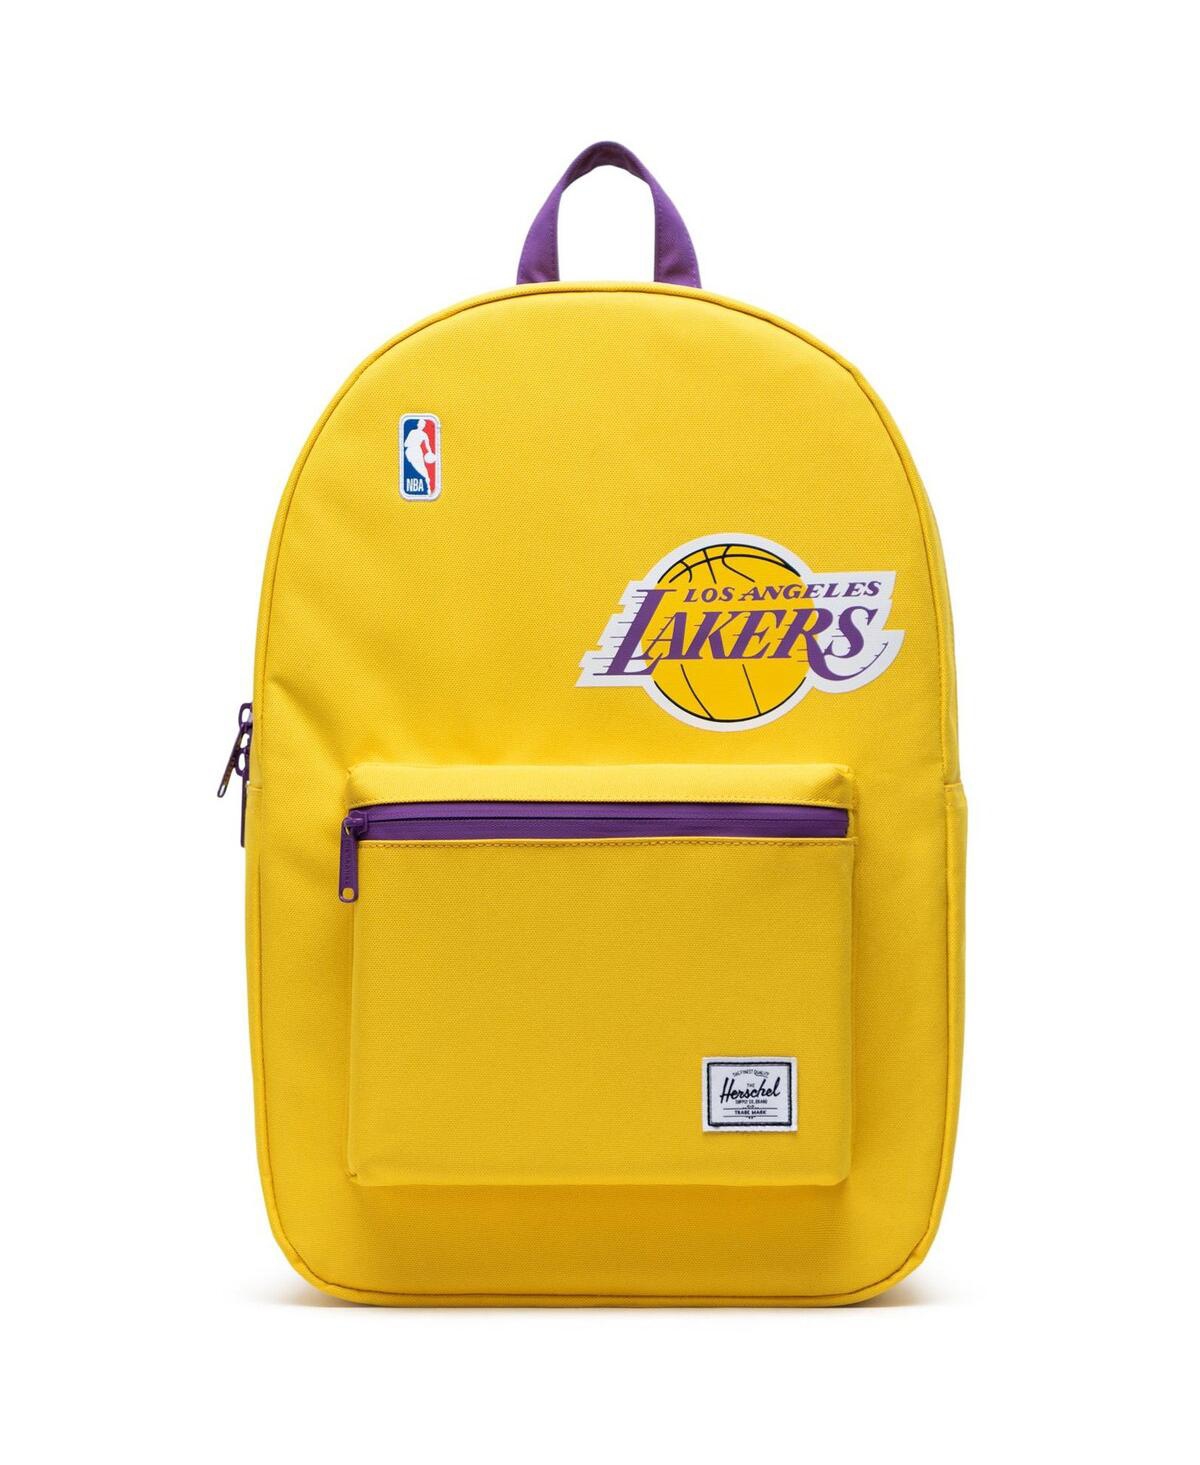 Supply Co. Los Angeles Lakers Statement Backpack - Yellow